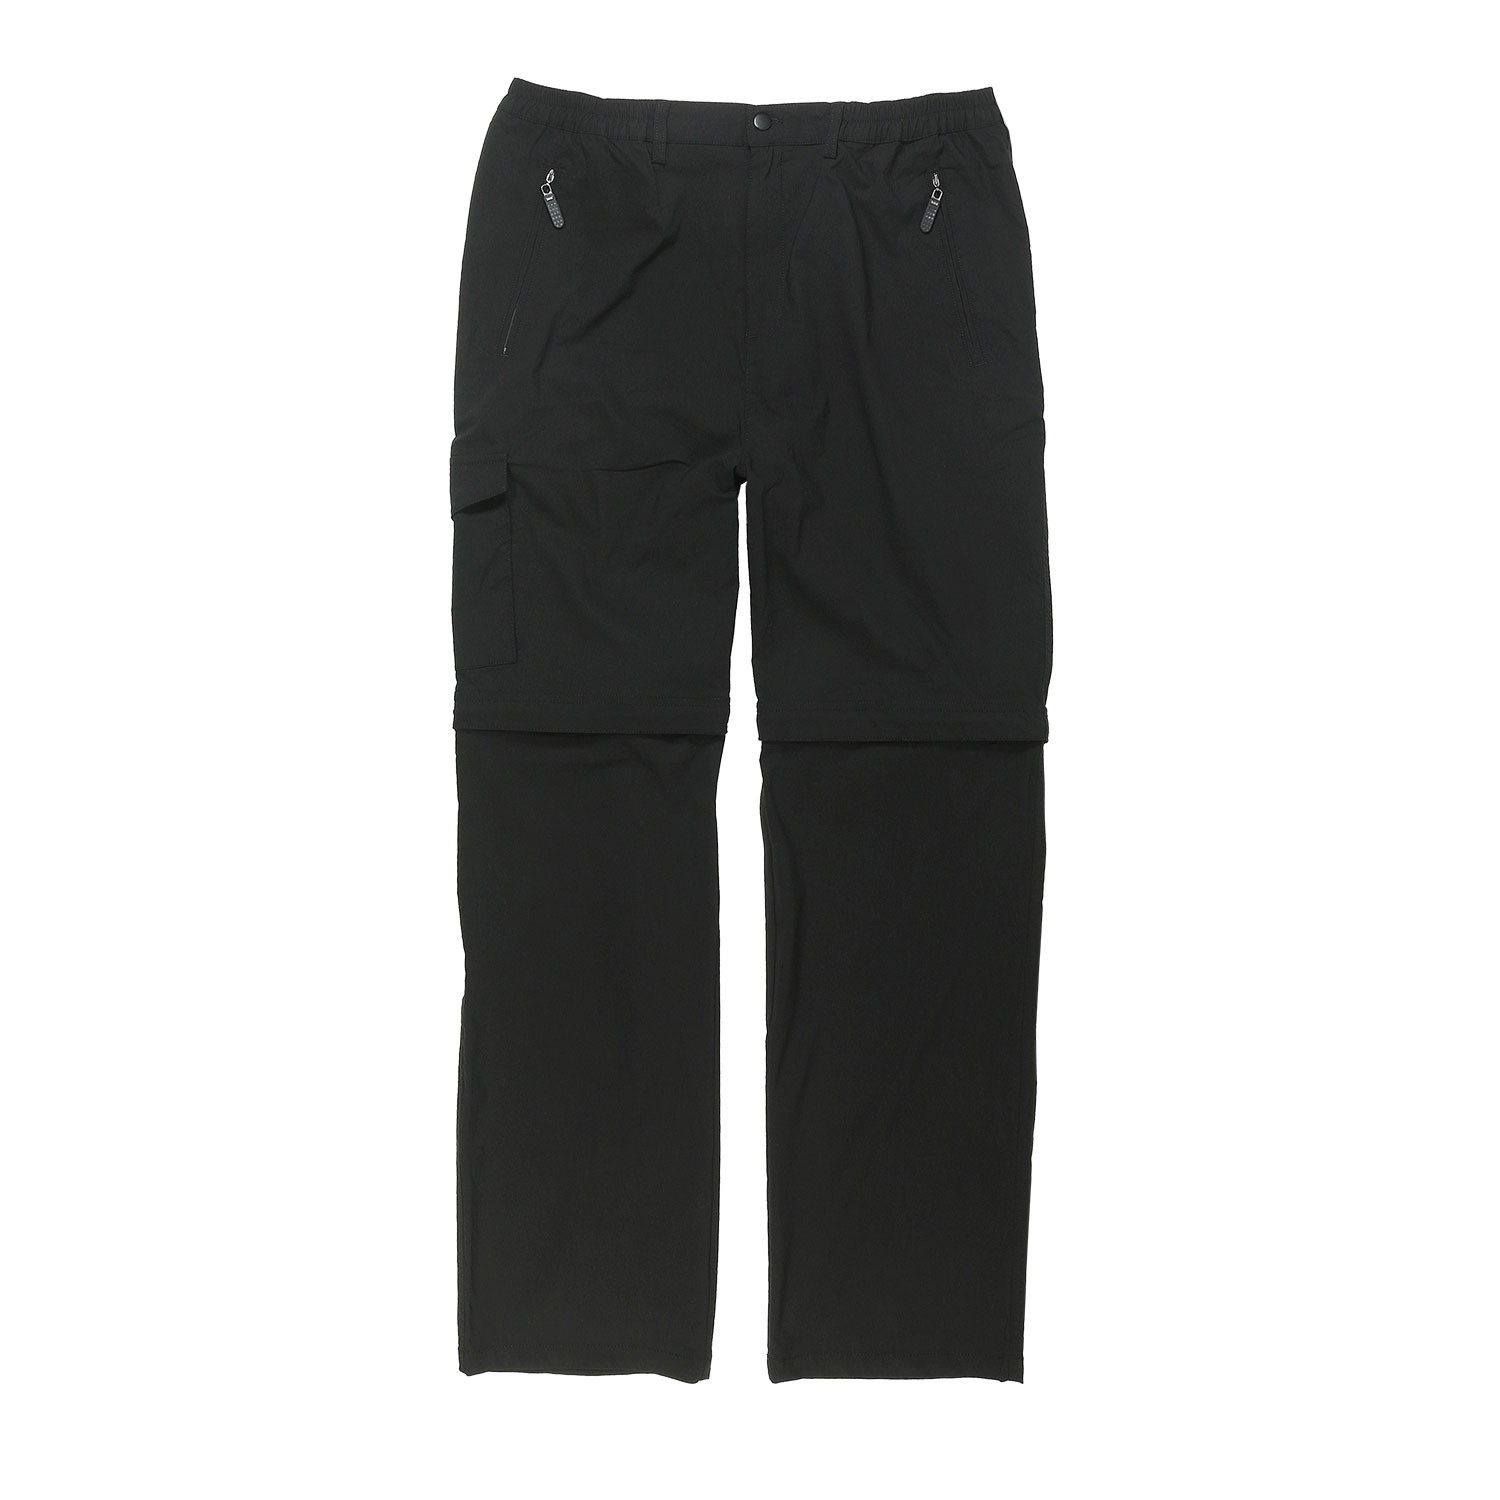 Abraxas zip-off pants in black up to oversize 10XL